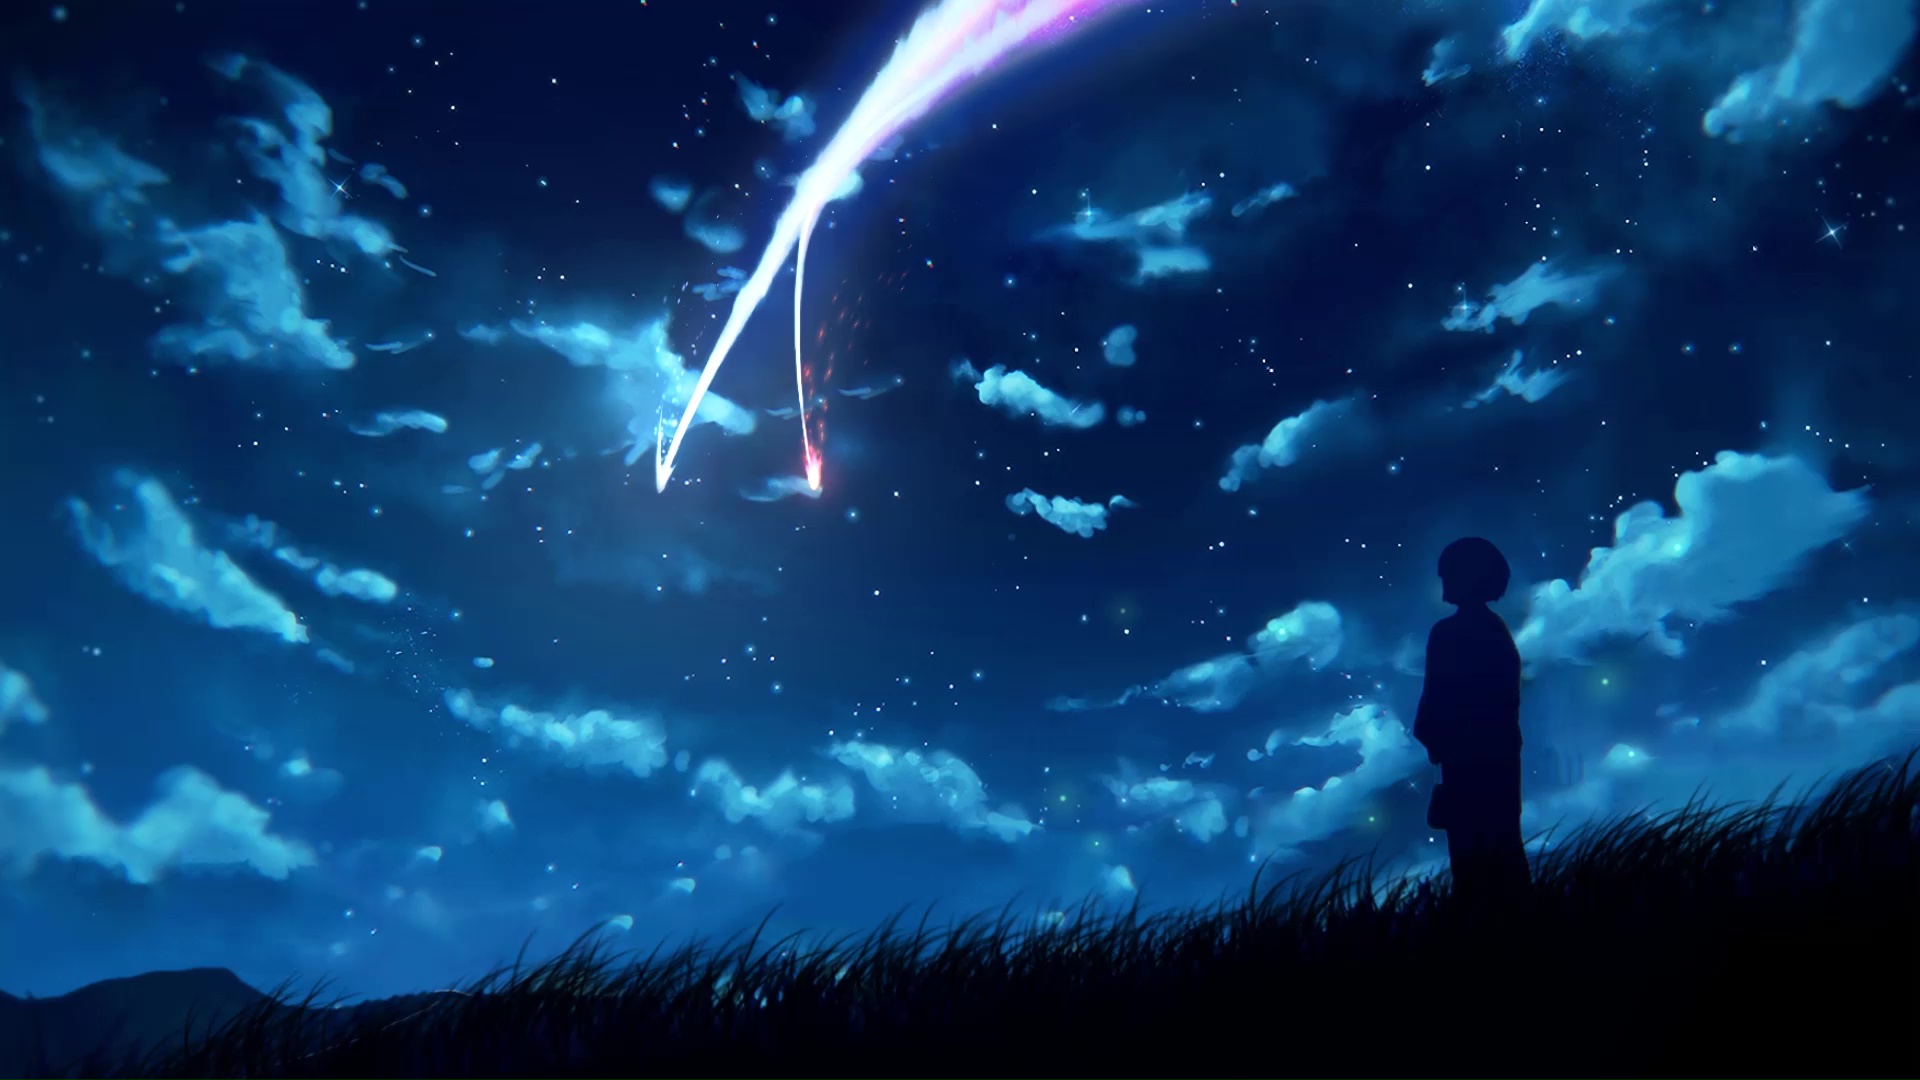 Mitsuha Looking At The Comet In The Sky Your Name Live Wallpaper Moewalls